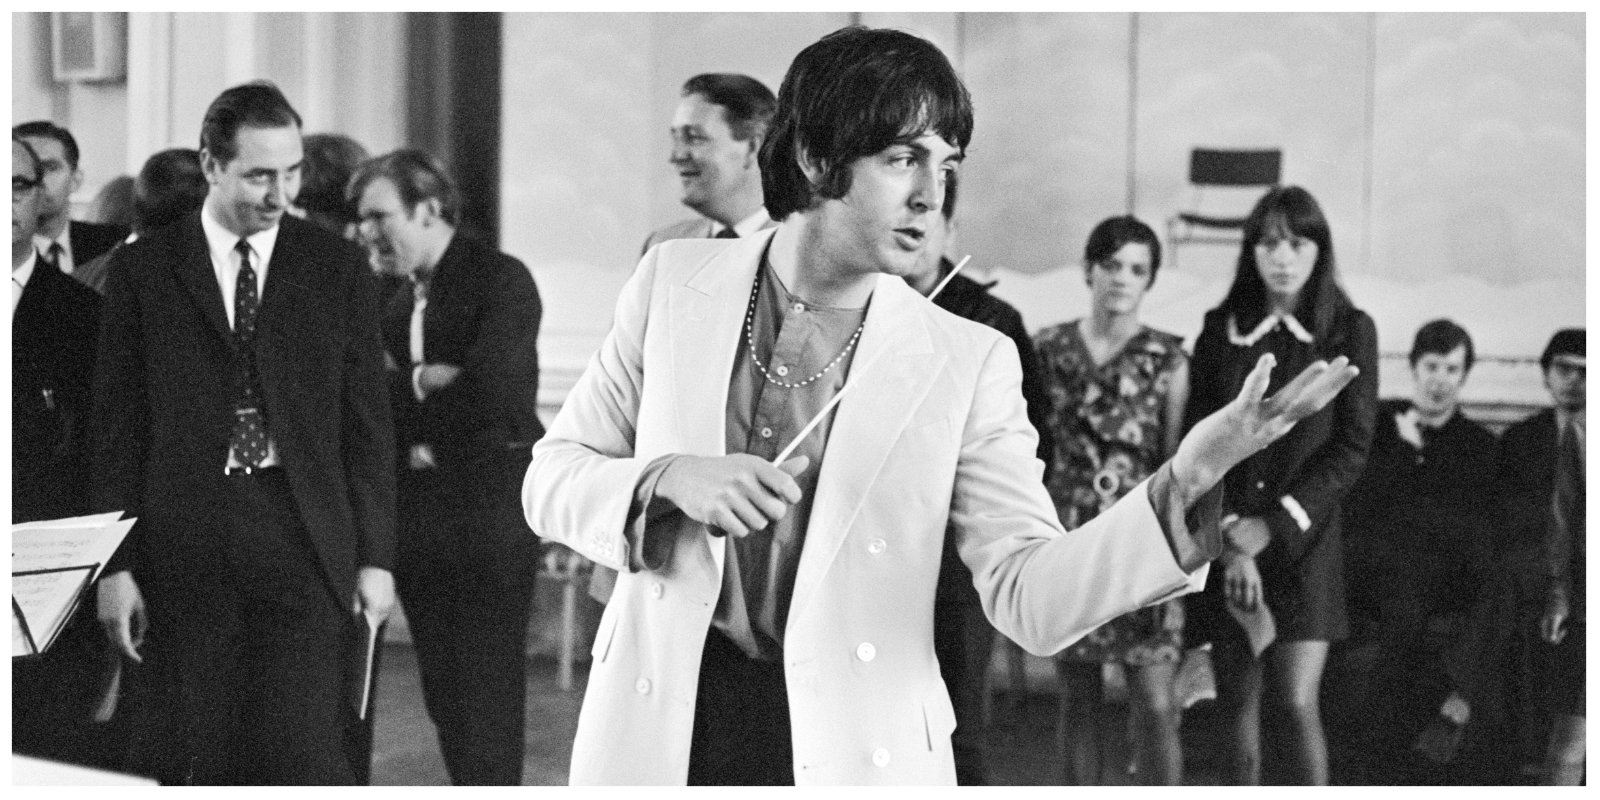 Paul McCartney of The Beatles, conducts the Black Dyke Mills Band, recording a record, Thingmebob, written by Paul for a new television series, at the Victoria Hall, Saltaire, Yorkshire, 30th June 1968.